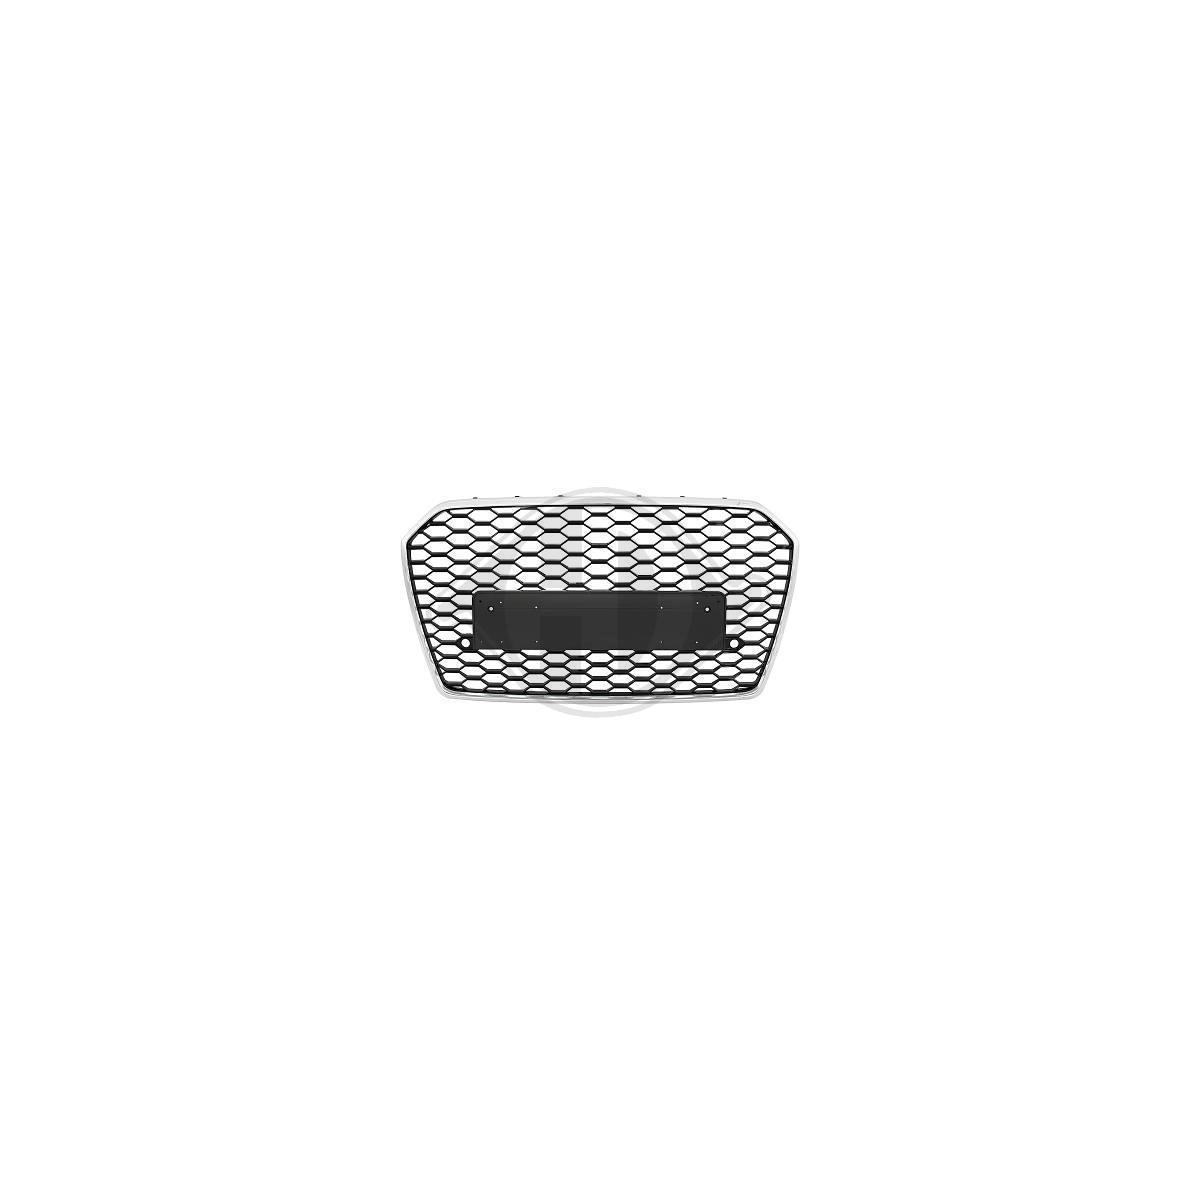 GRILL AUDI A6 C7 11-14 RS6 LOOK PDC